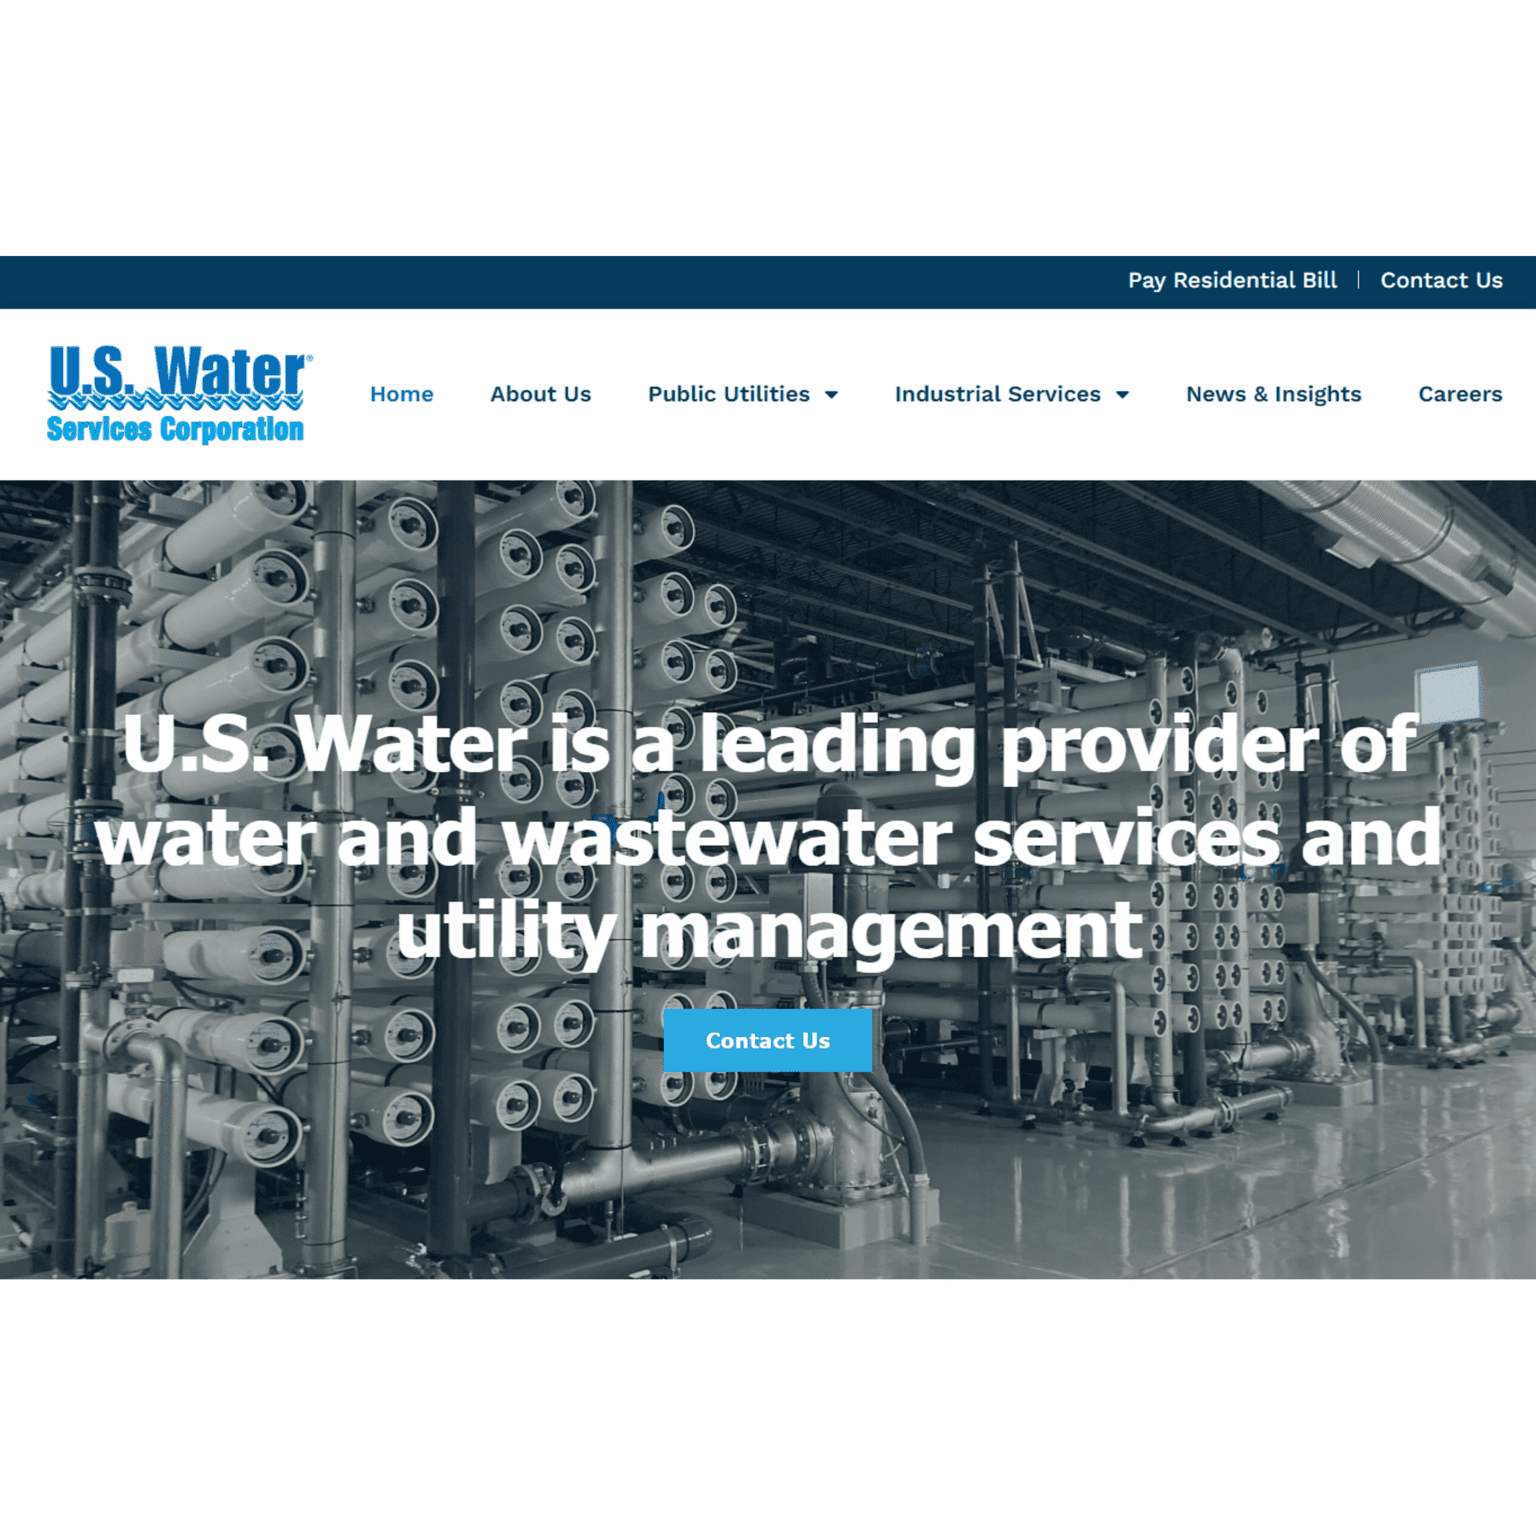 US Water is a leading provider of water and wastewater services and utility management